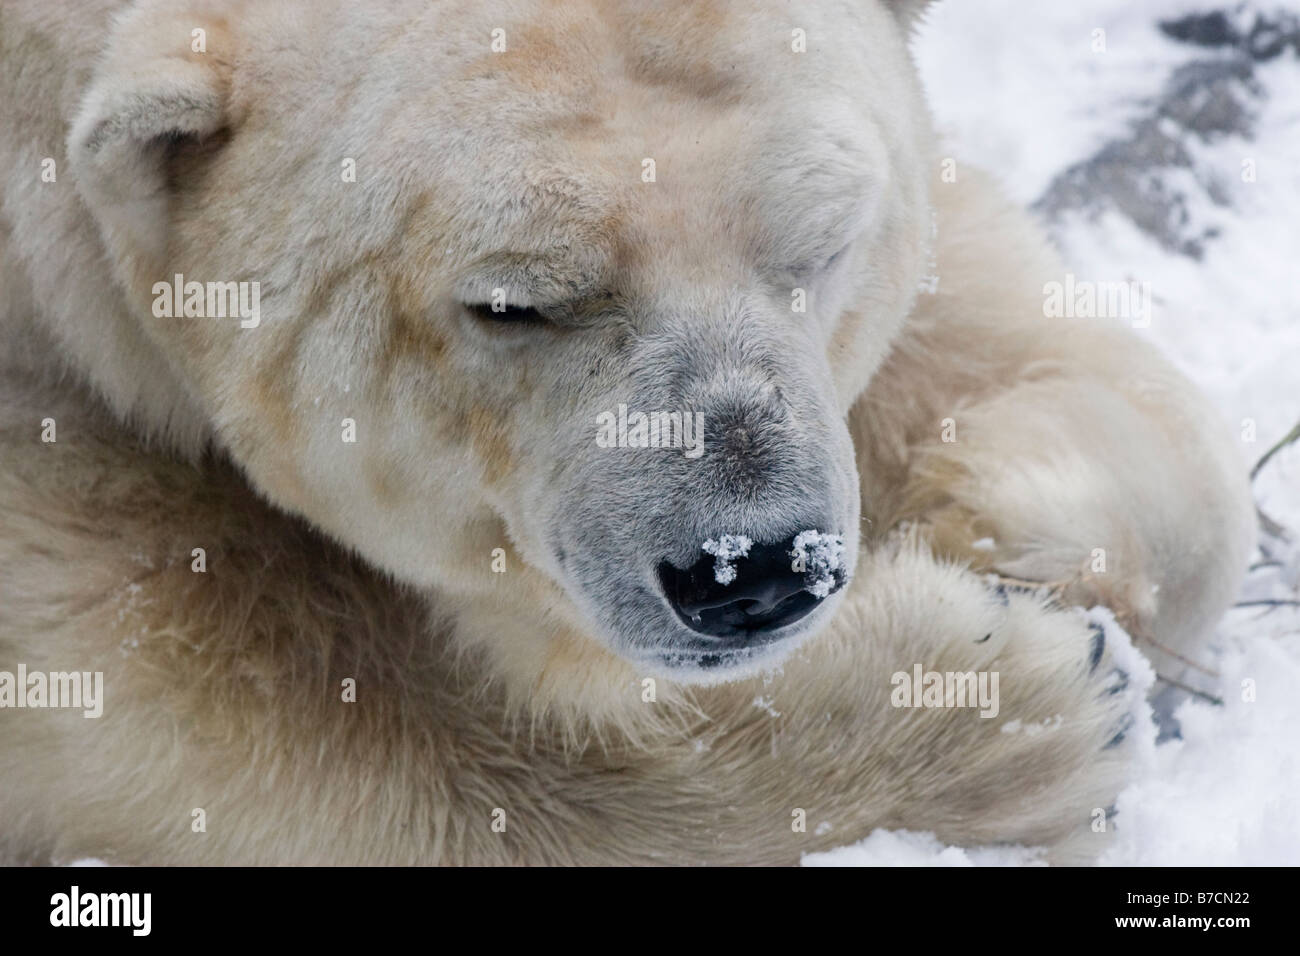 A polar bear is seen in its enclosure at the Central Park Zoo in New York Stock Photo